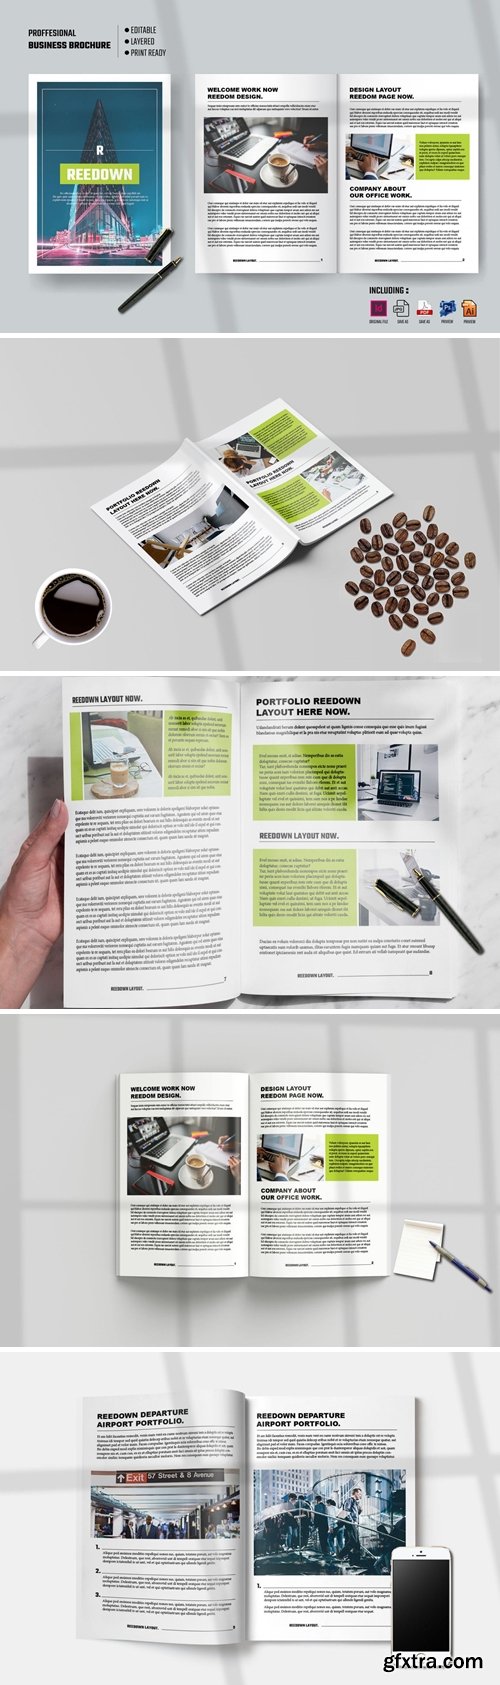 REEDOWN - Professional Business Brochure Template